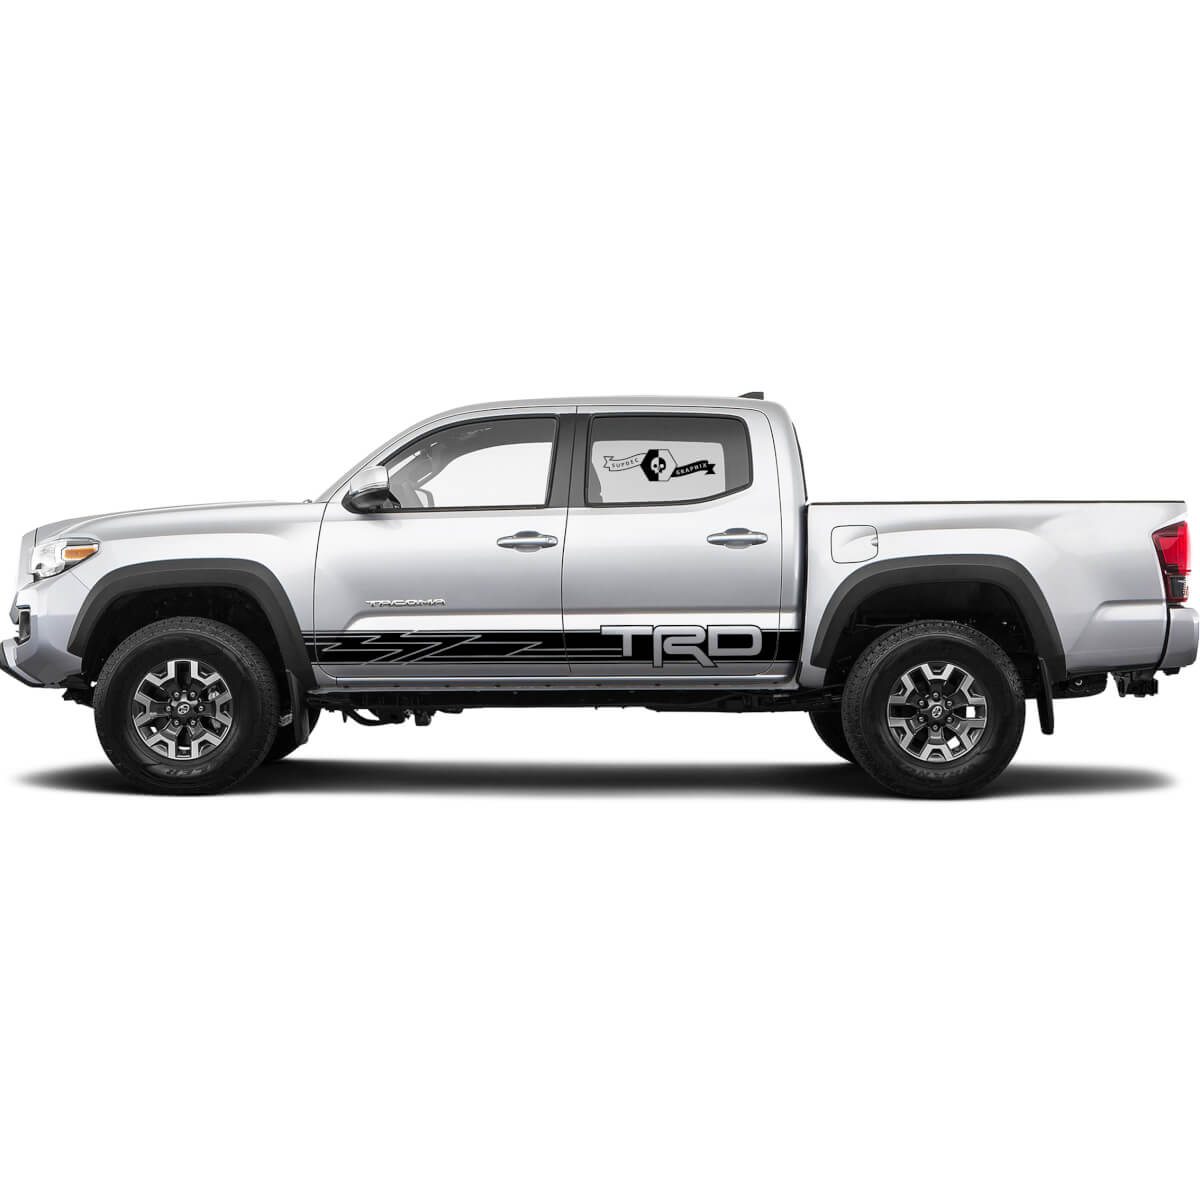 TRD Toyota Racing Style for Rocker Panel Decals Stickers for Tacoma FJ Cruiser Tundra Hilux 4Runner 5